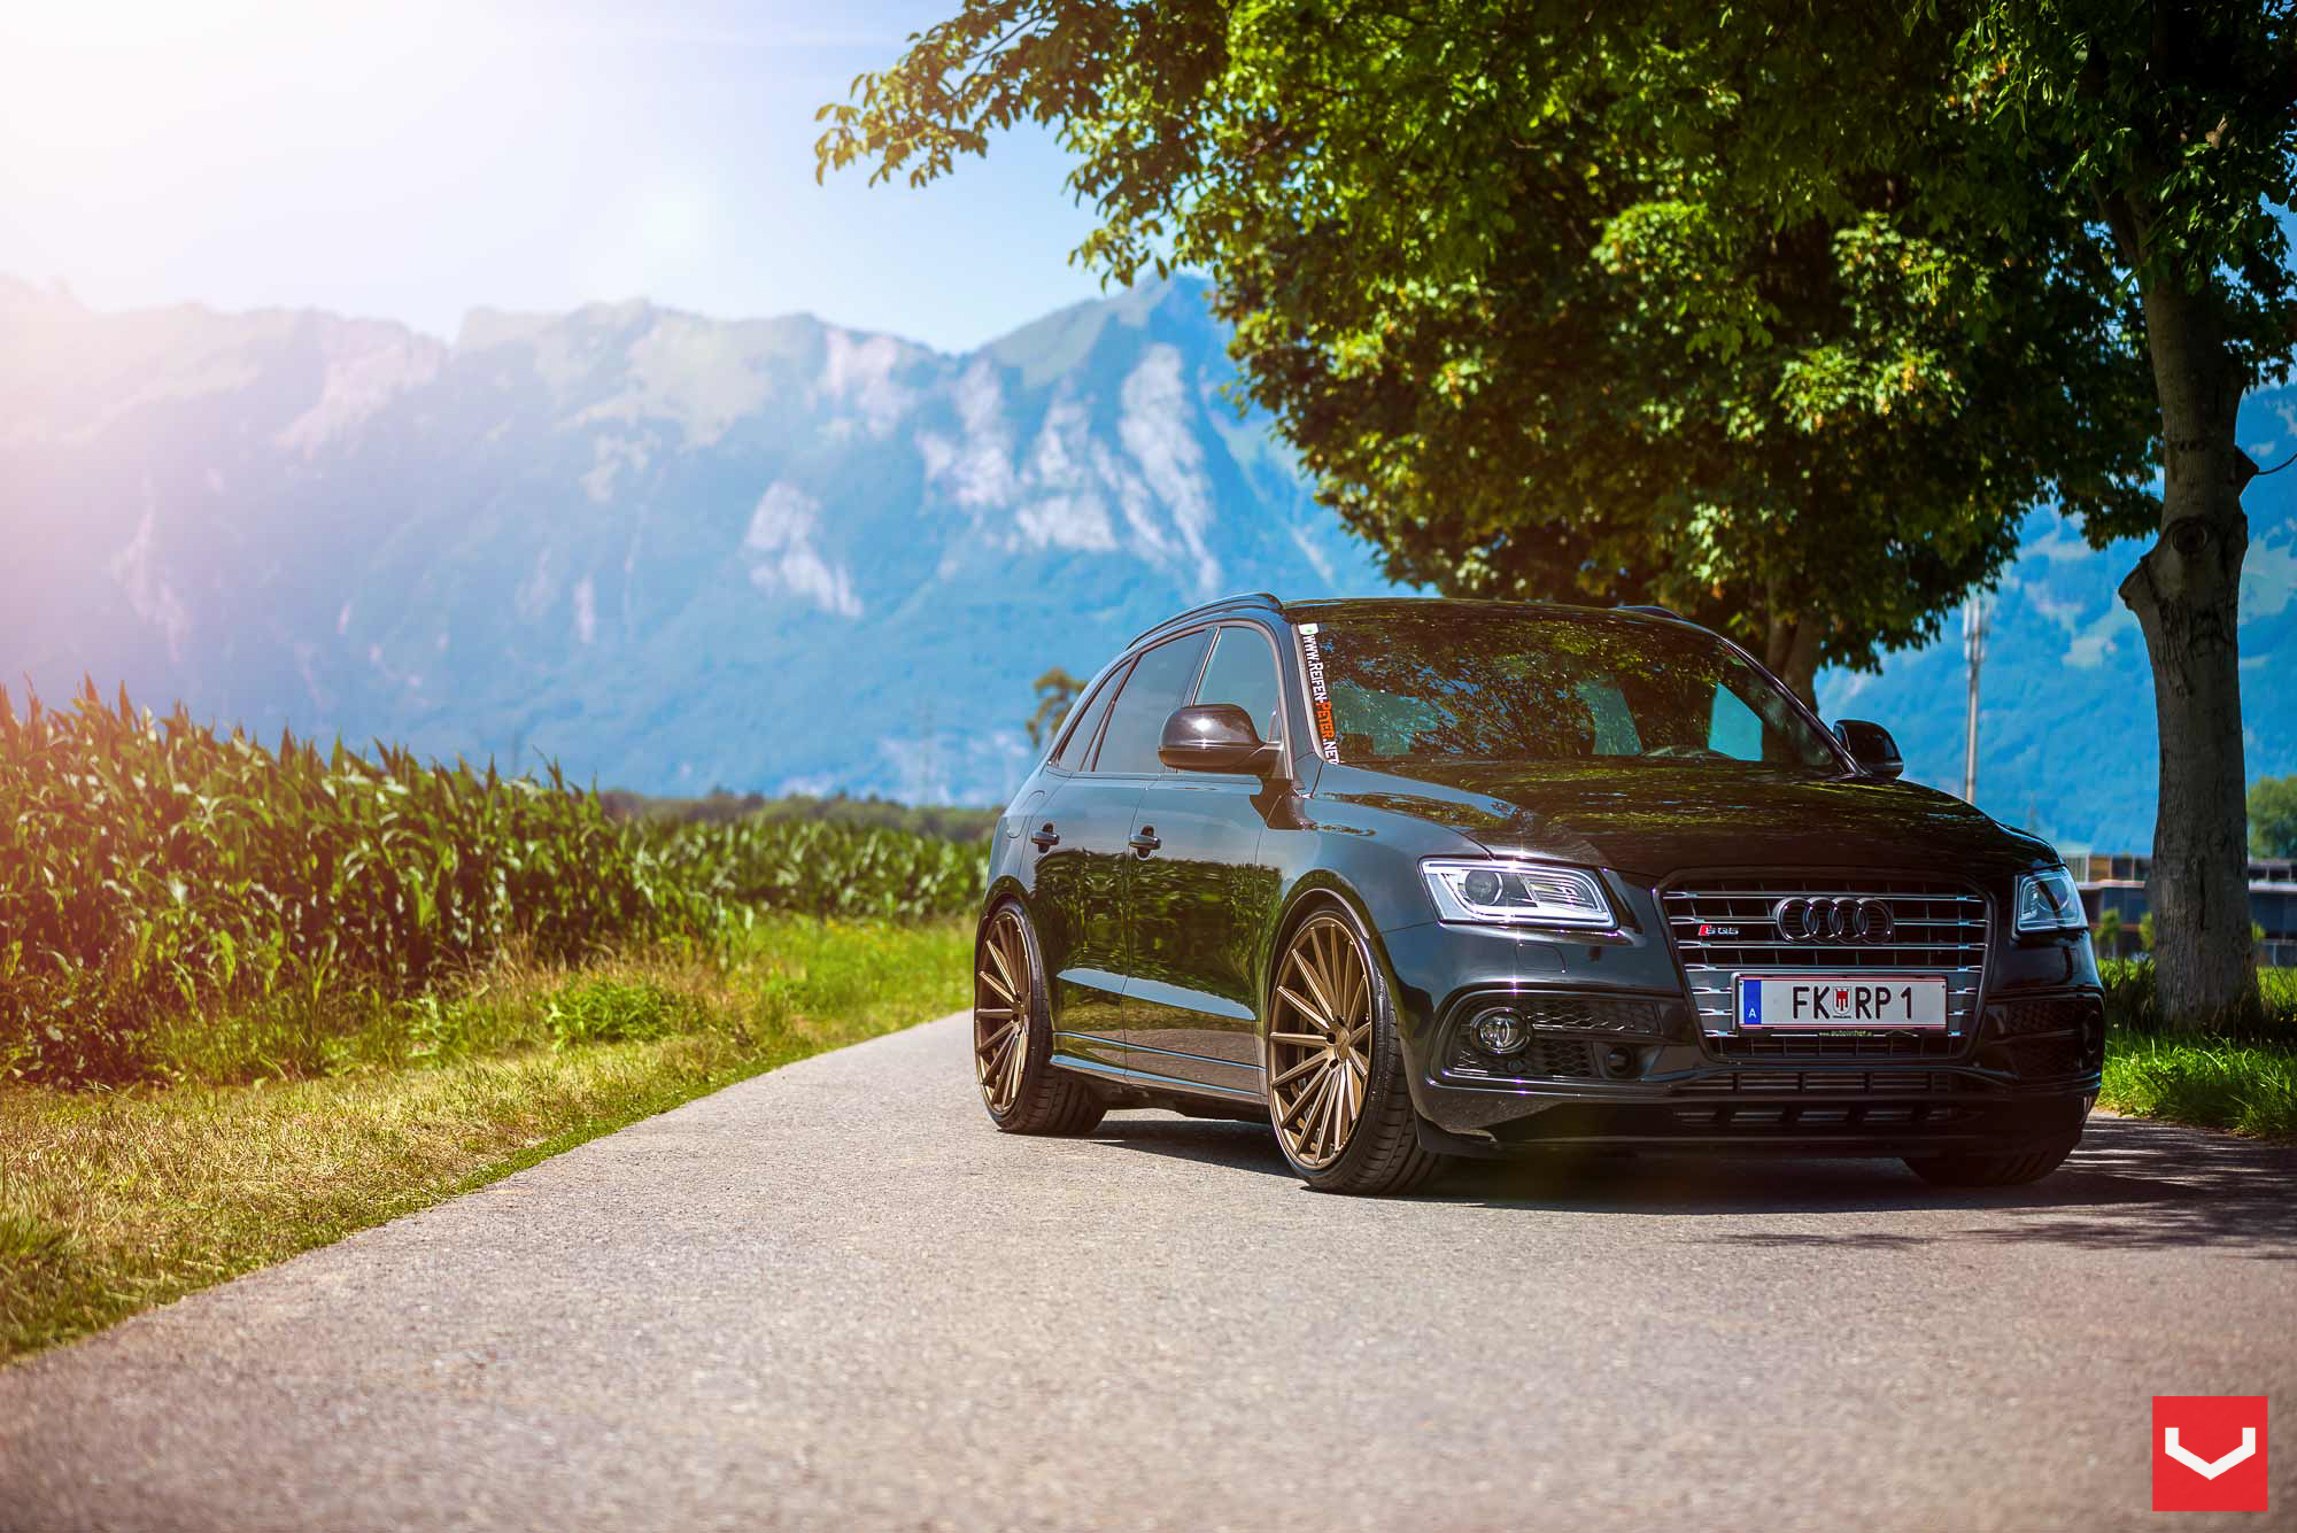 Black Audi Q5 with Custom Grille - Photo by Vossen